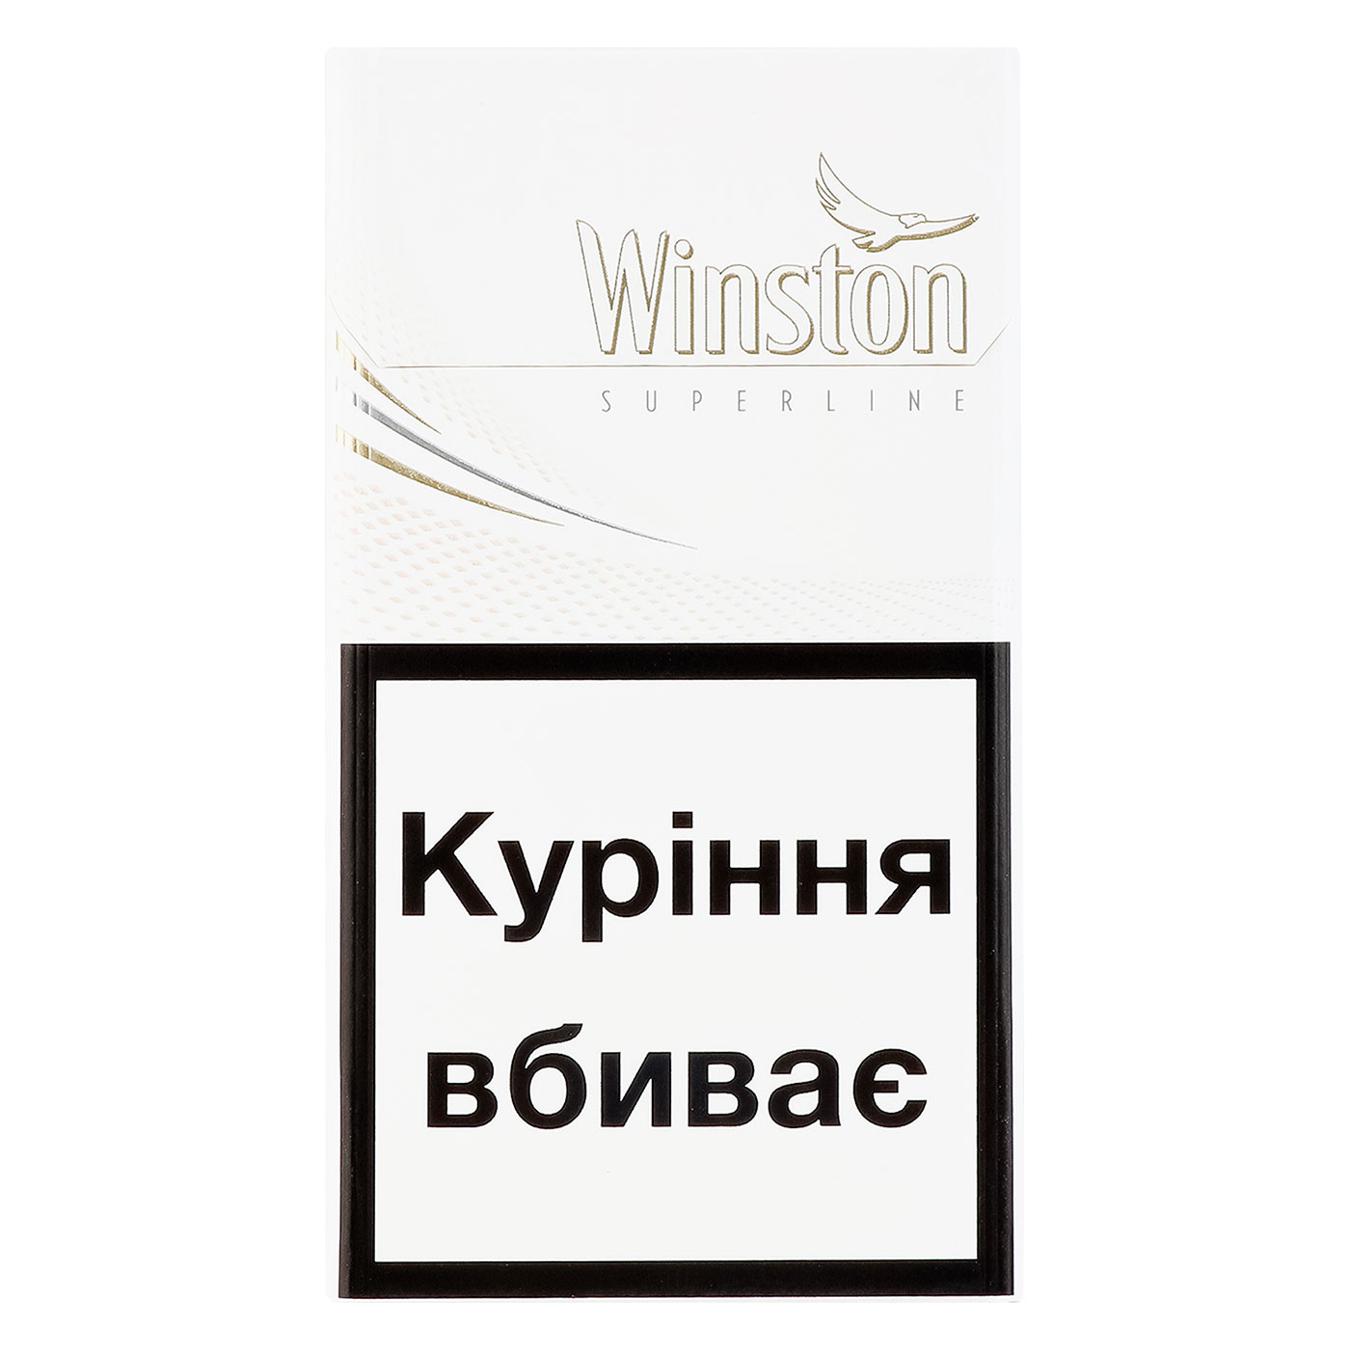 Winston White Super Slims Cigarettes 20 pcs (the price is indicated without excise tax)